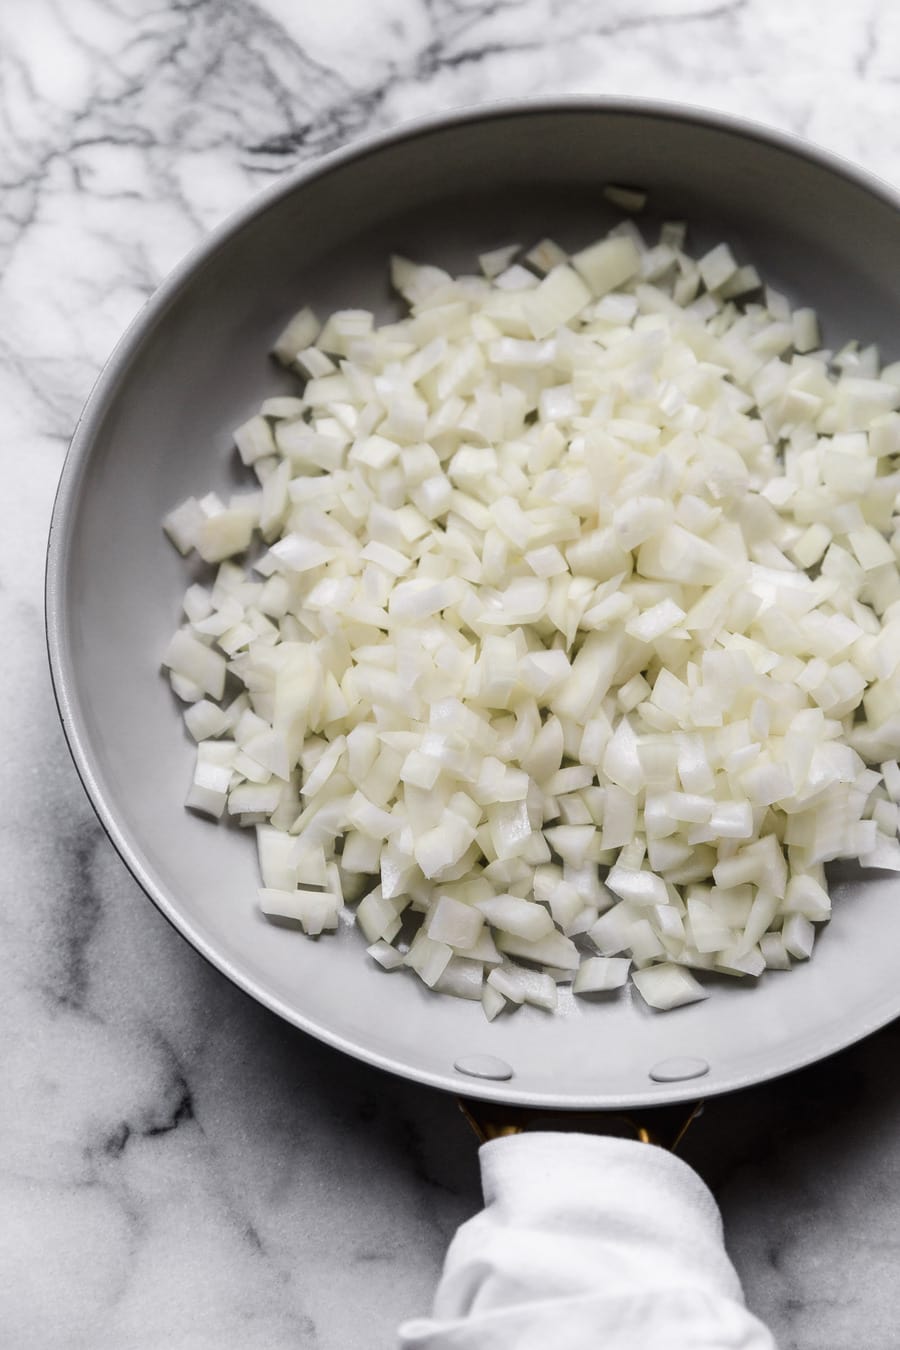 How to Cut an Onion (How to Dice, Mince, and Chop Onions) VIDEO!!